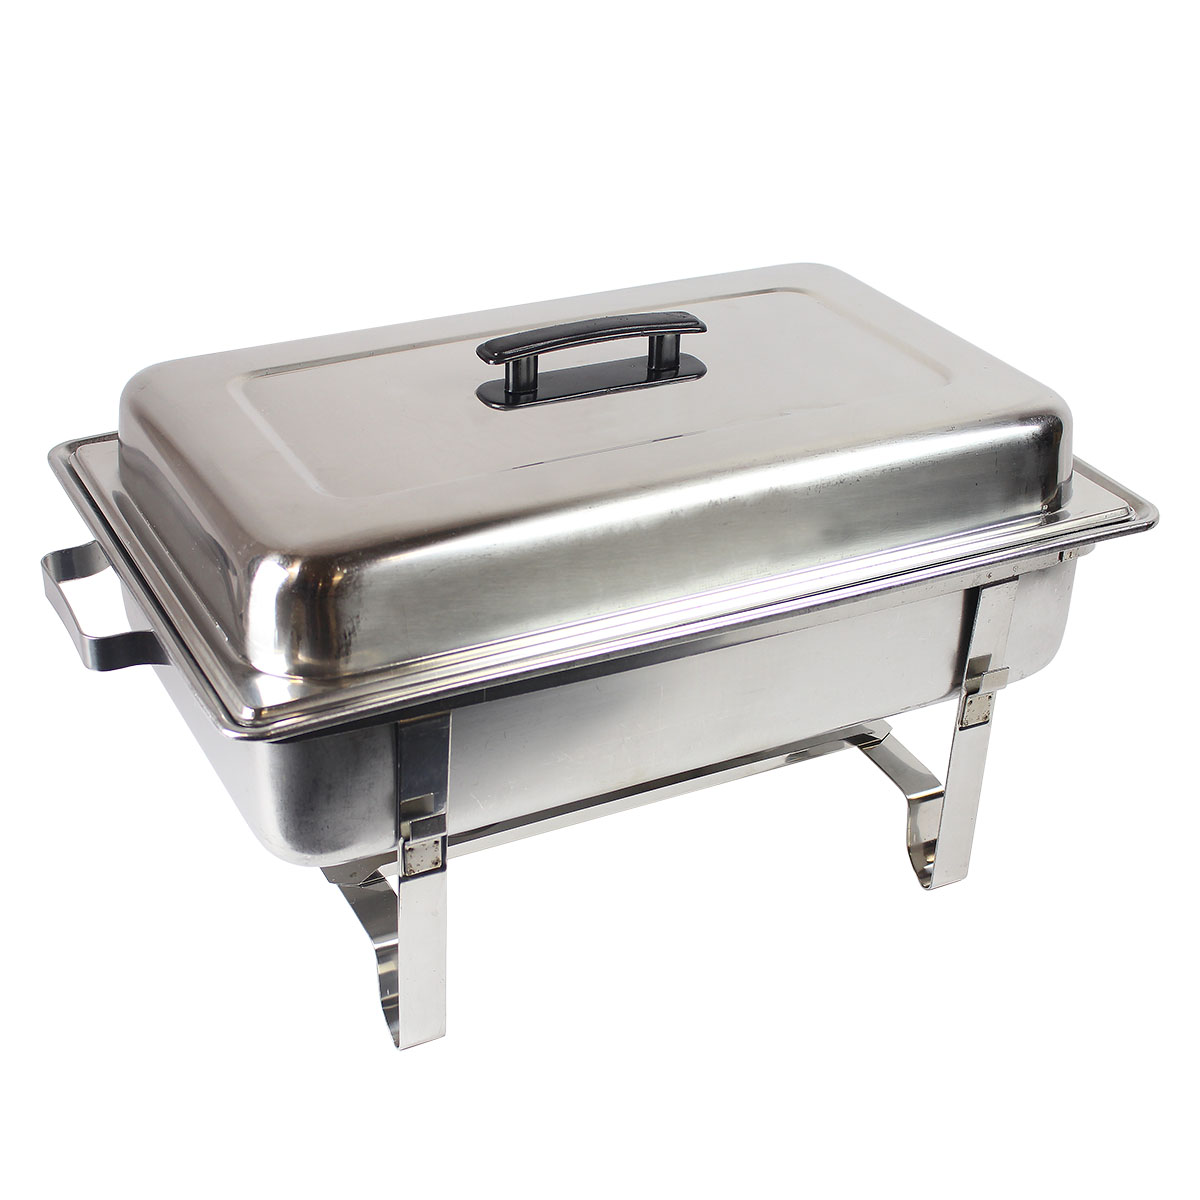 https://www.cantonchairrental.com/Resources/Images/Equipment_Guide/Categories/8qt%20Chafer_stainless.jpg